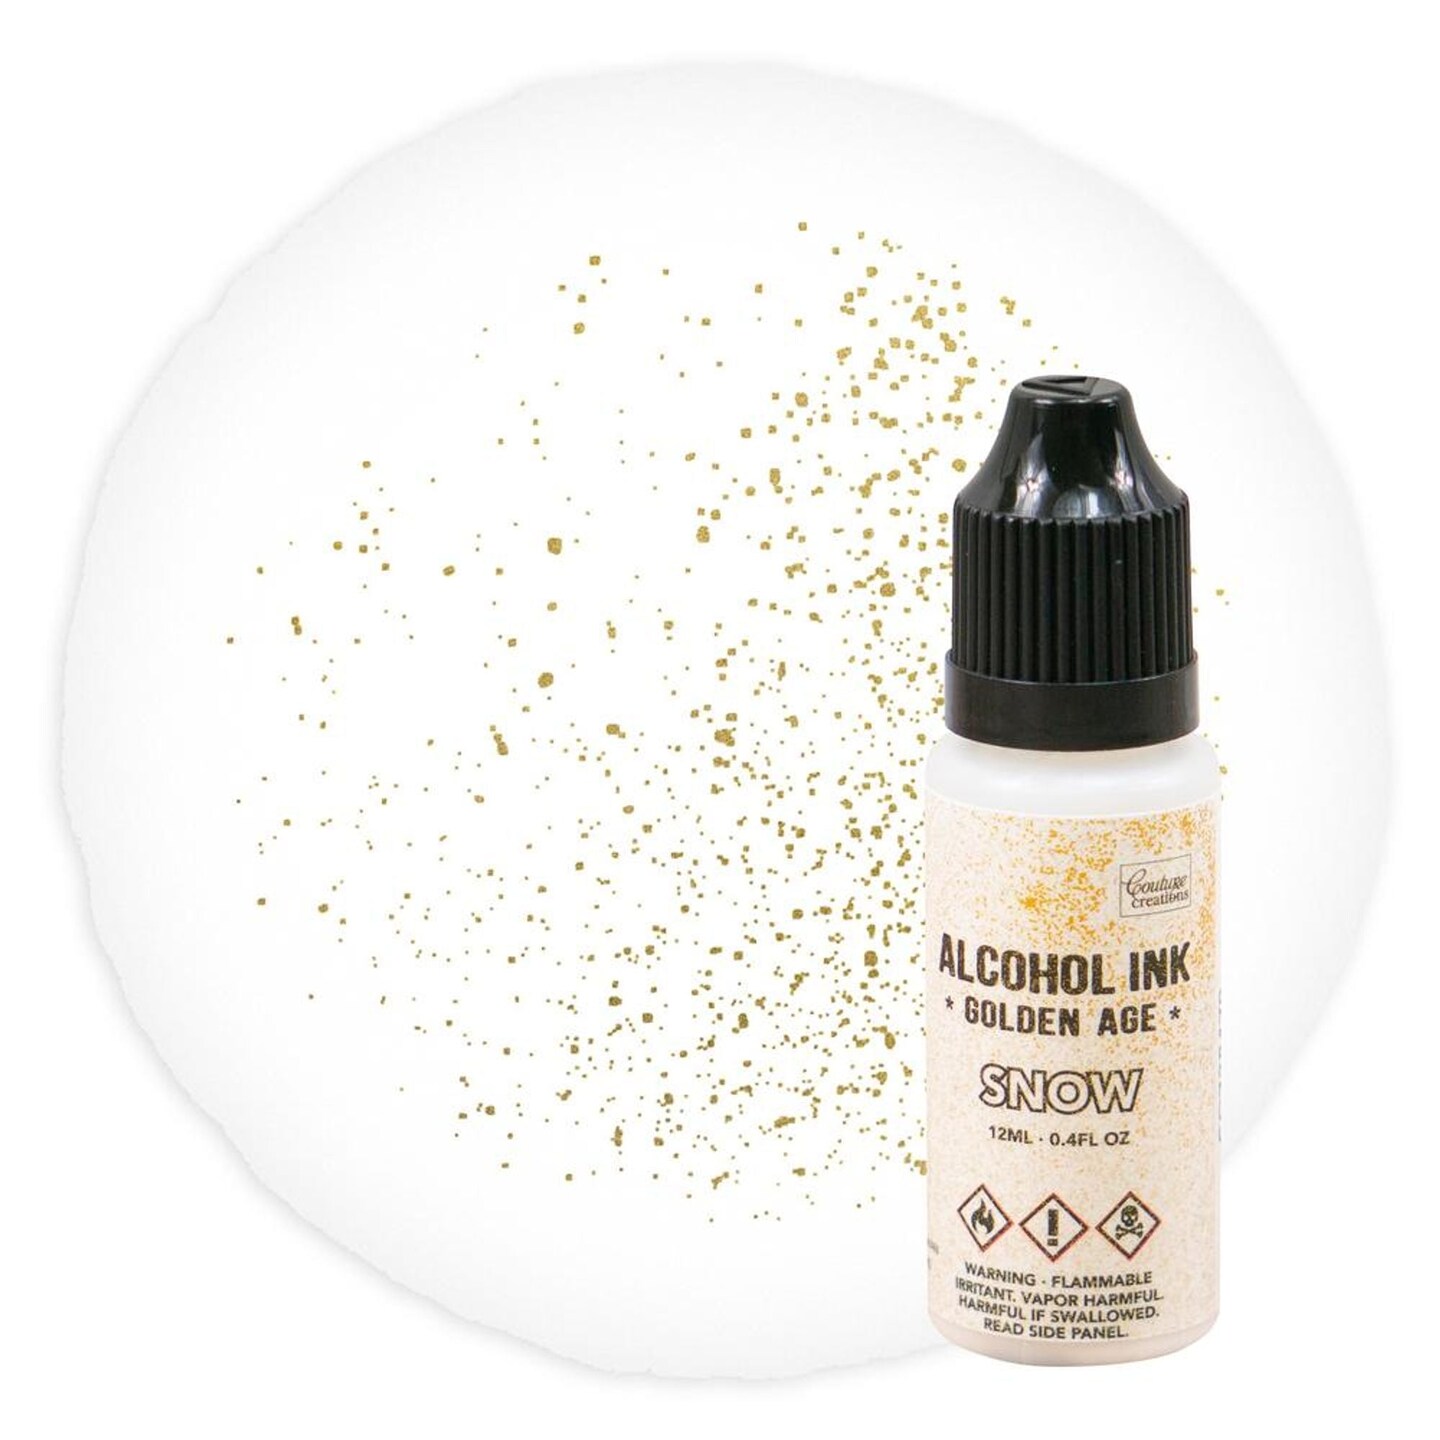 Couture Creations Alcohol Ink Golden Age 12mL | 0.4fl oz - Turquoise